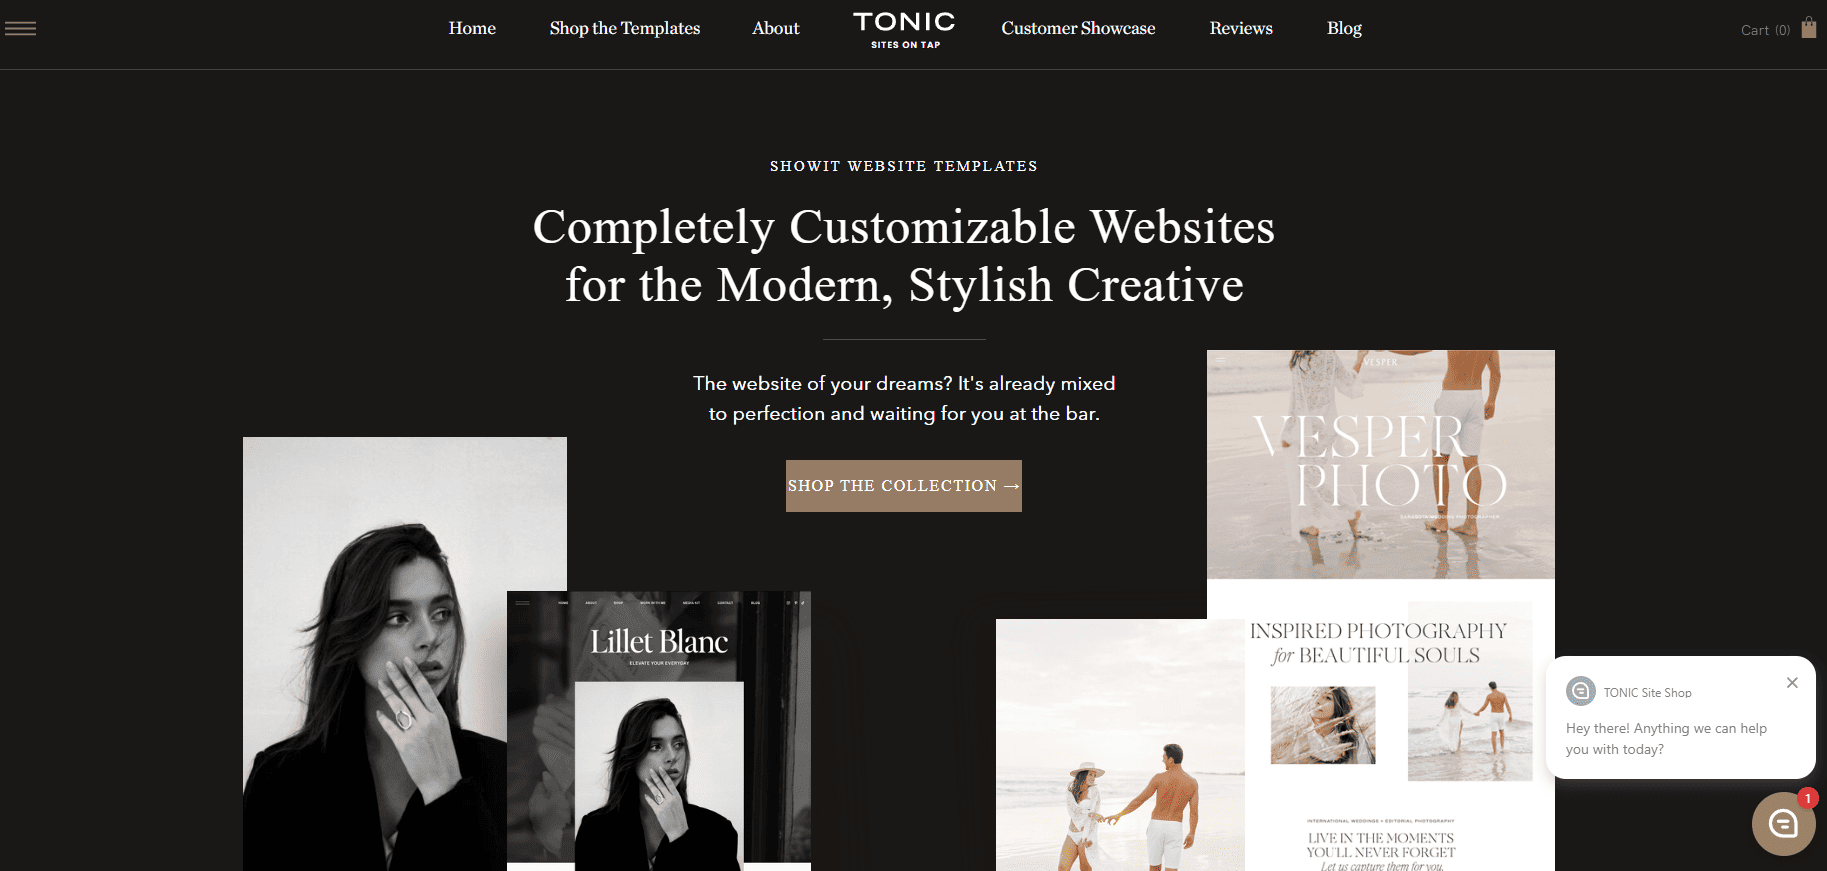 Tonic Site shop is a high paying affiliate program. 